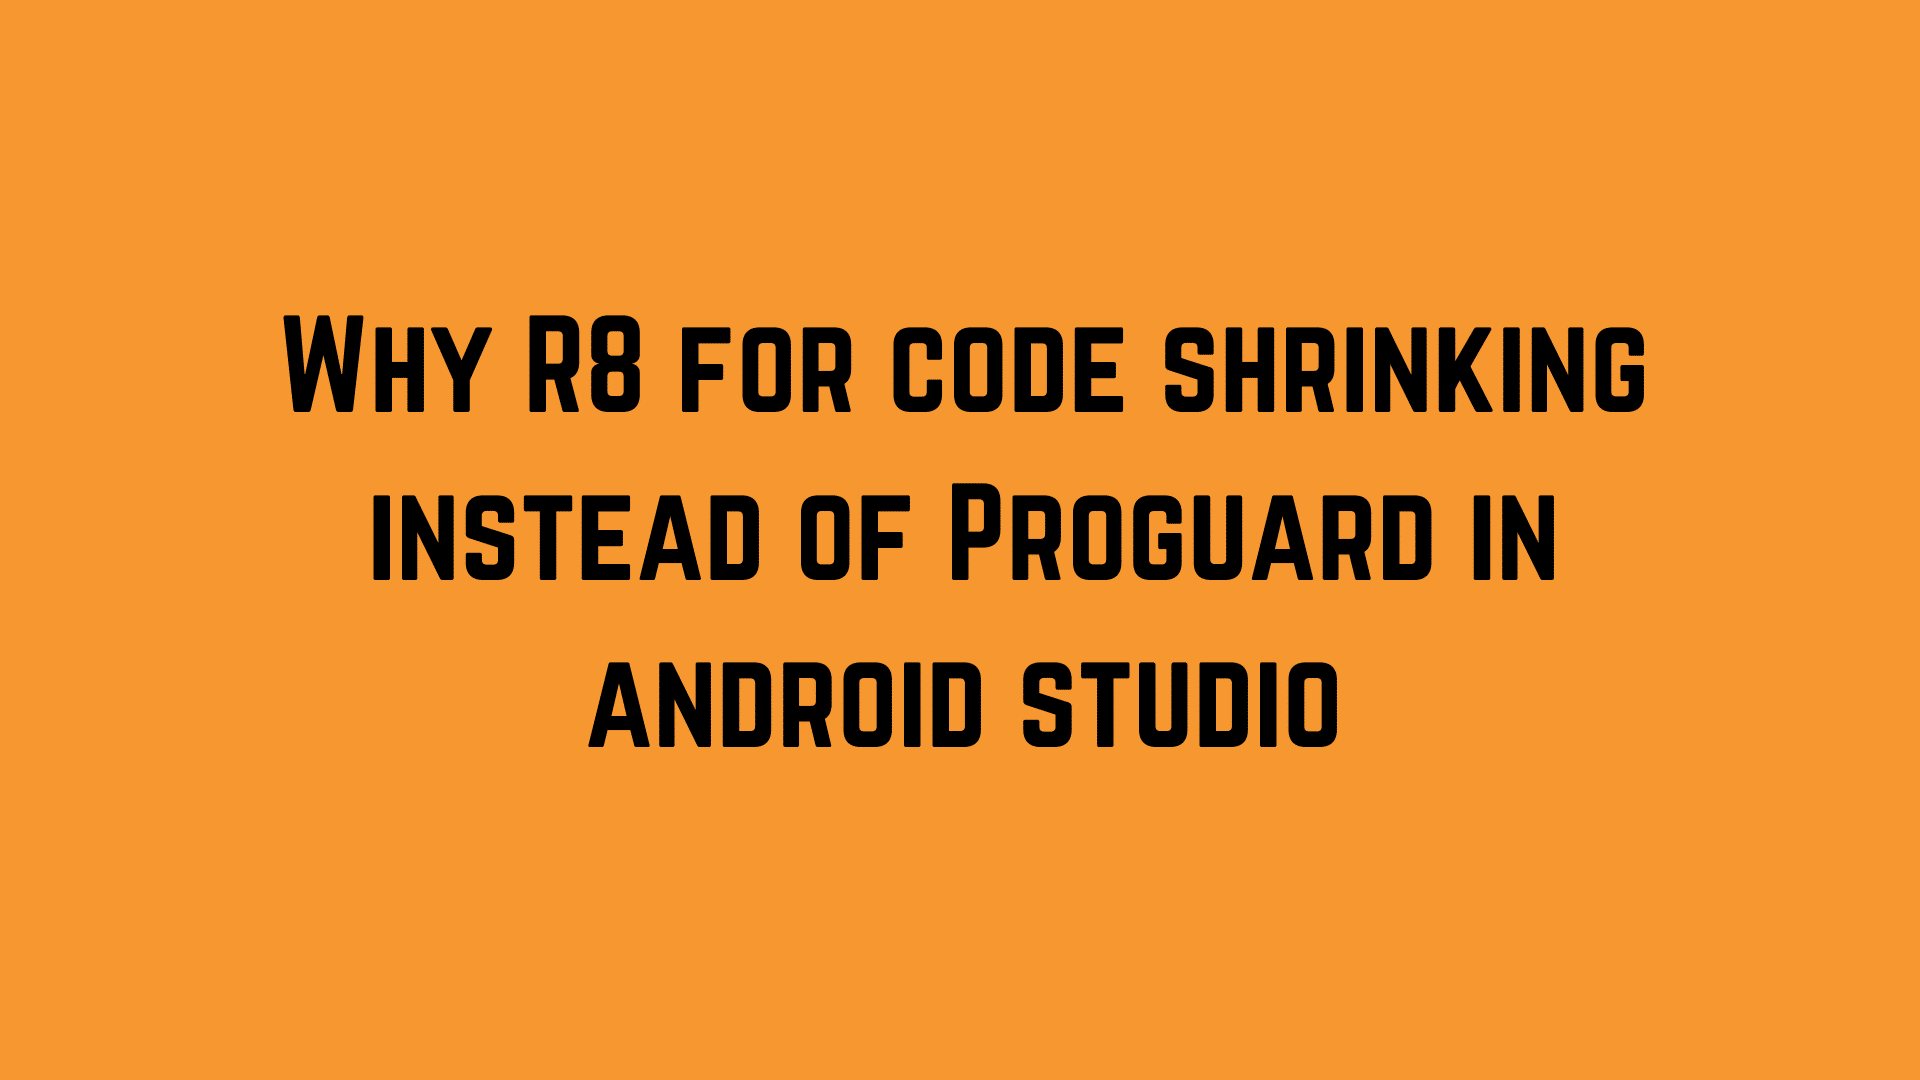 Why R8 for code shrinking instead of Proguard in android studio